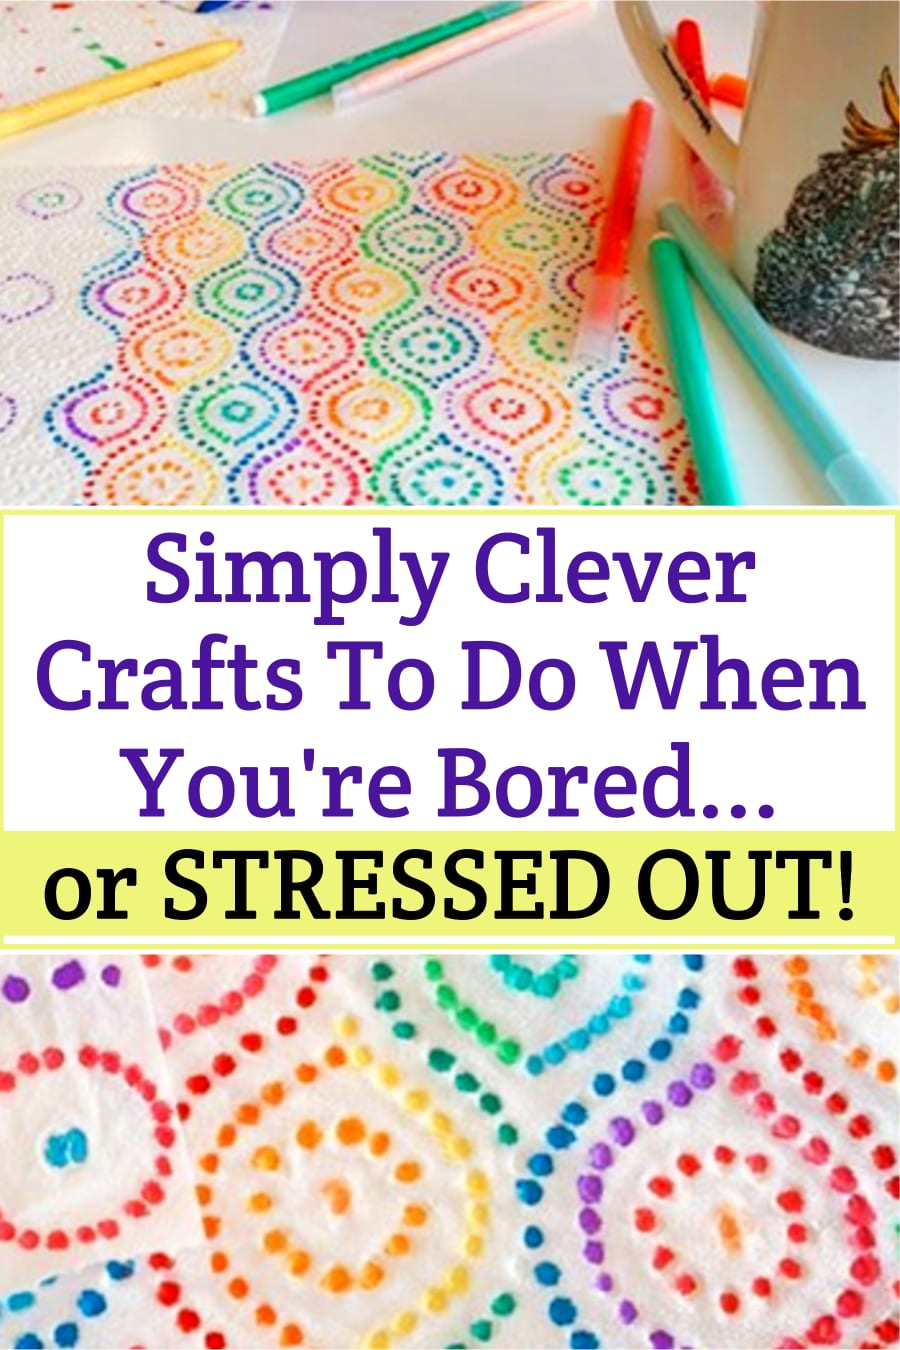 Clever Crafts To Do When You're Bored - Or STRESSED - Clever DIY Ideas -   diy To Do When Bored draw